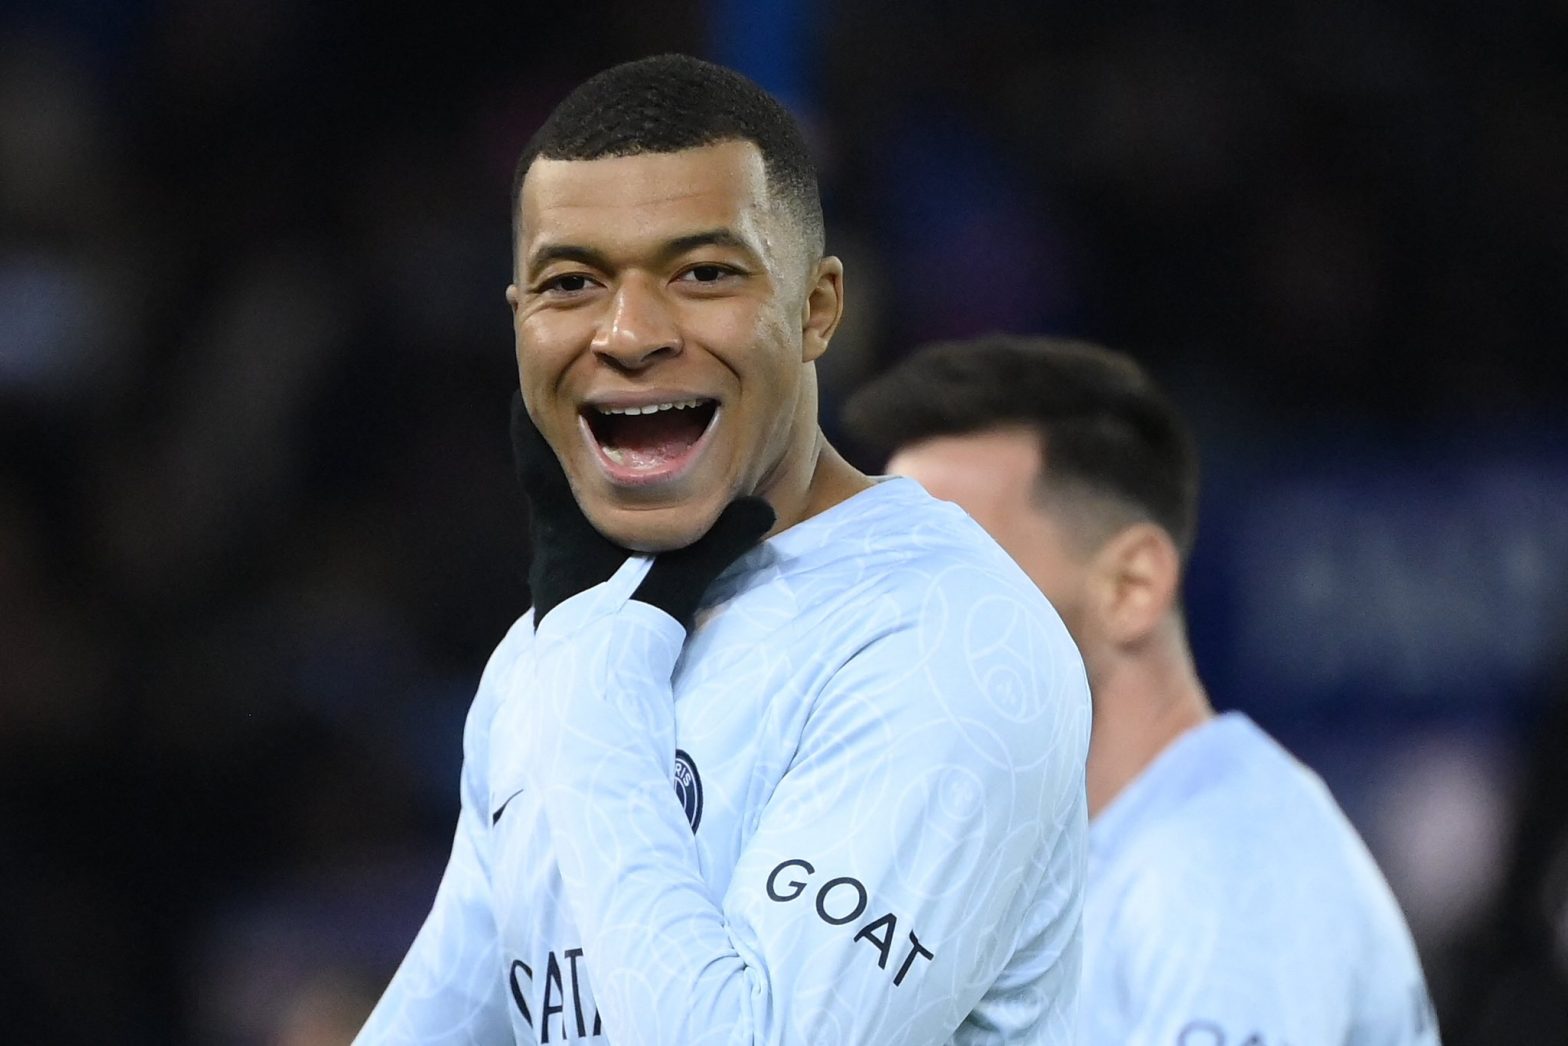 Will Kylian Mbappe extend contract with PSG beyond 2025?